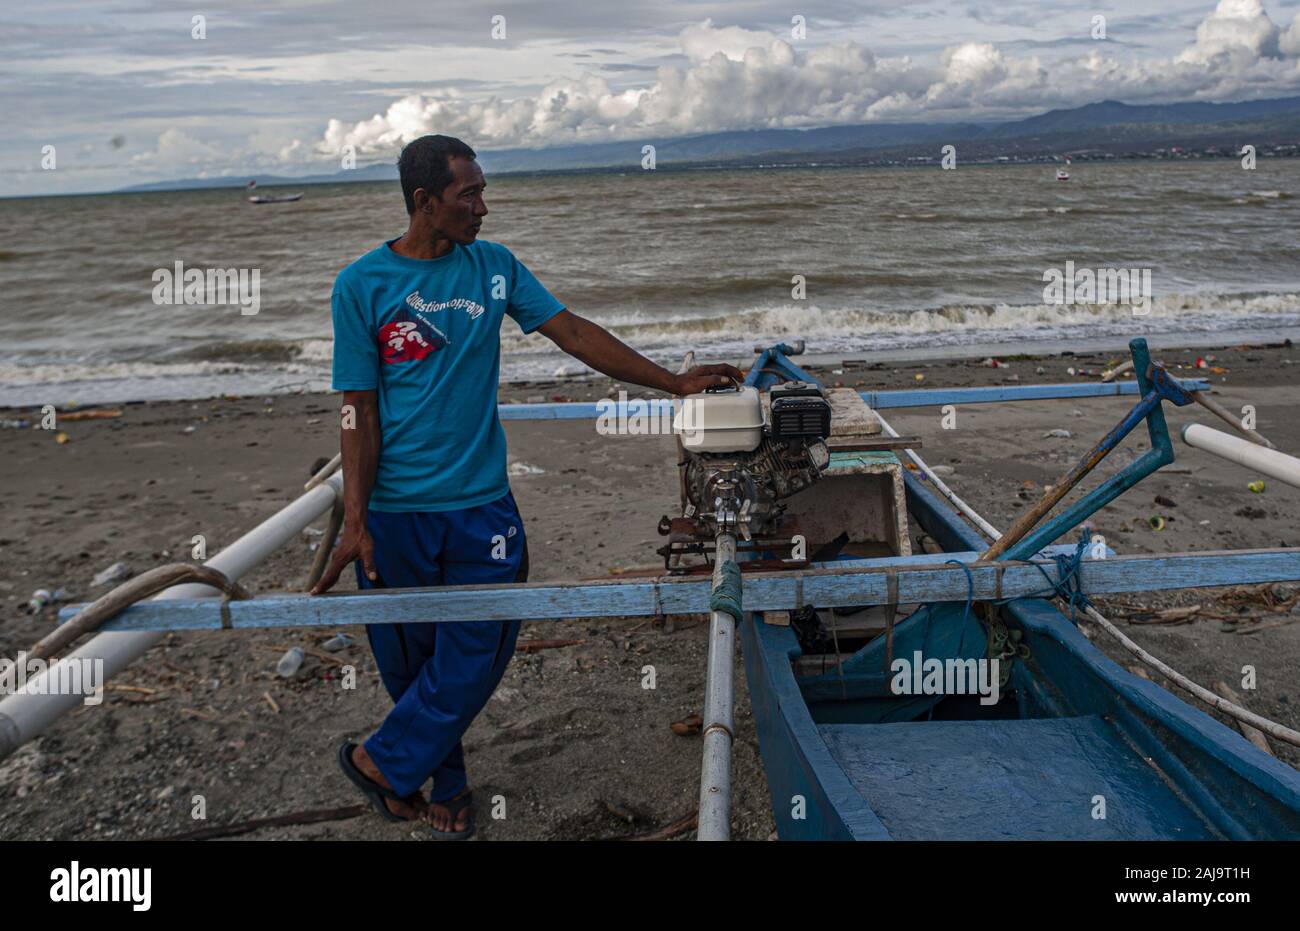 Palu City, Central Sulawesi, Indonesia. 3rd Jan, 2020. A fisherman poses next to his boat.High waves in the waters of Palu Bay forced Hundreds of fishermen in the village of Lere to anchor their boats. According to the Palu Meteorology, Climatology and Geophysics Agency (BMKG) the waves reached two meters to three meters, considered quite dangerous for fishermen. Credit: Opan Bustan/SOPA Images/ZUMA Wire/Alamy Live News Stock Photo